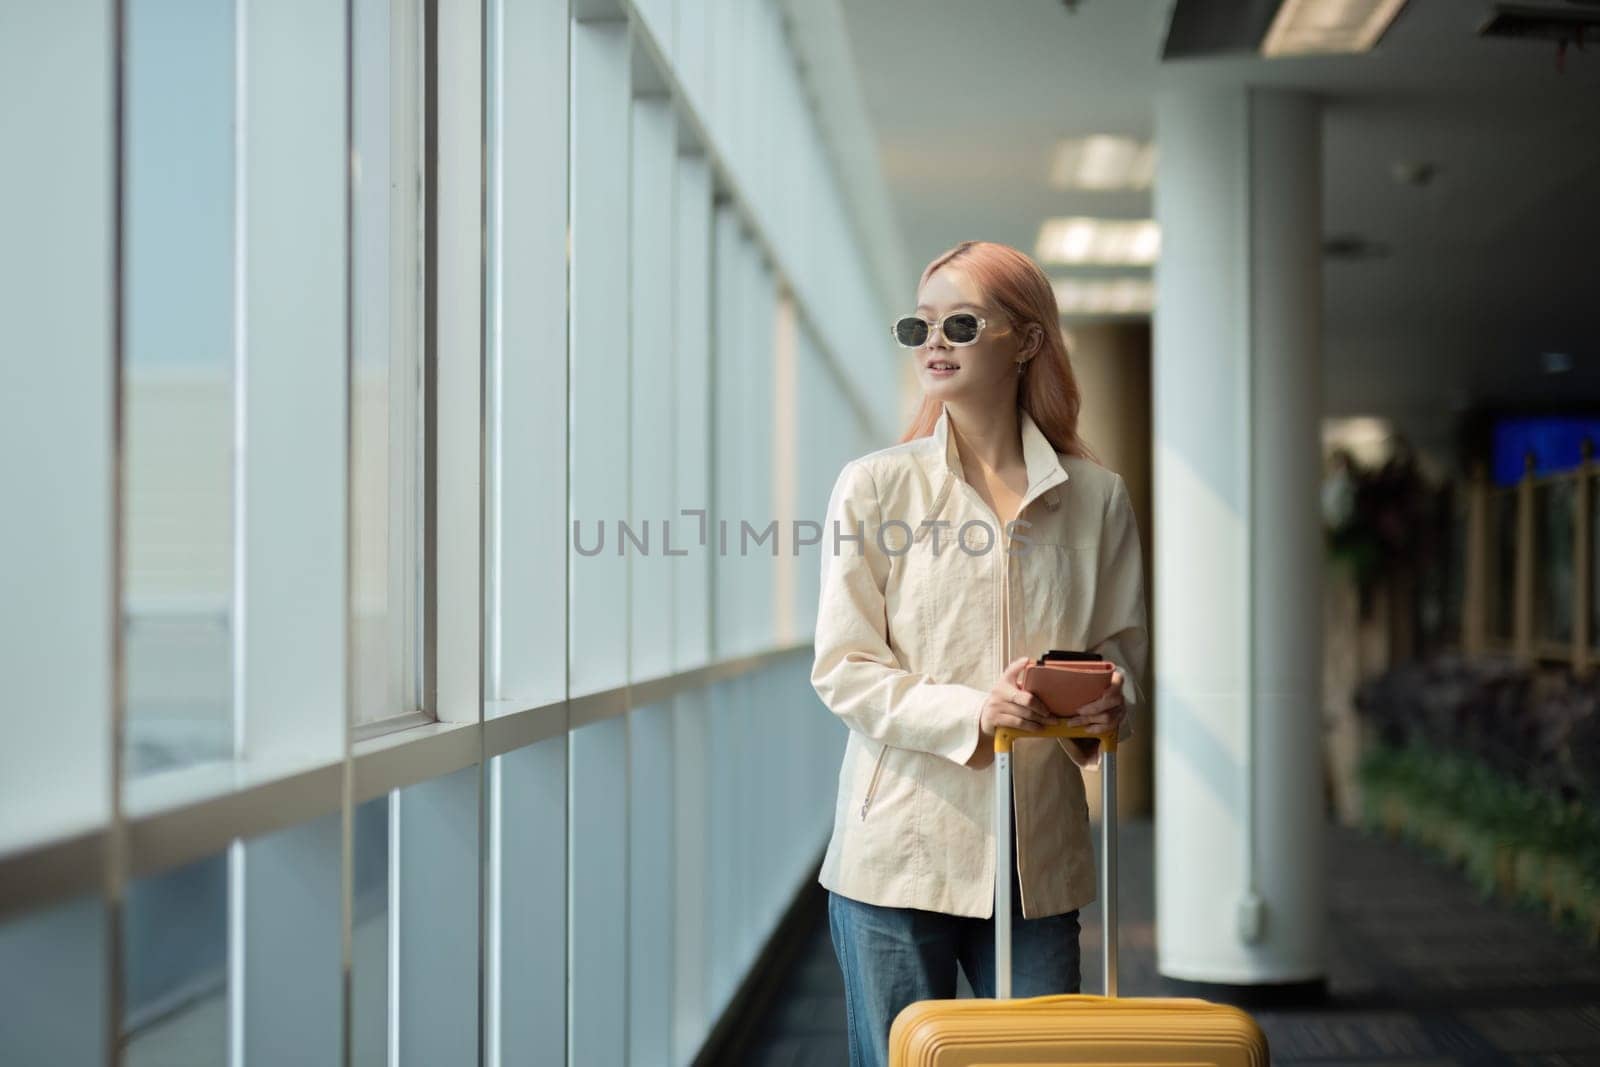 Asian woman with sunglasses holding luggage in airport terminal. Concept of travel, style, and anticipation by wichayada